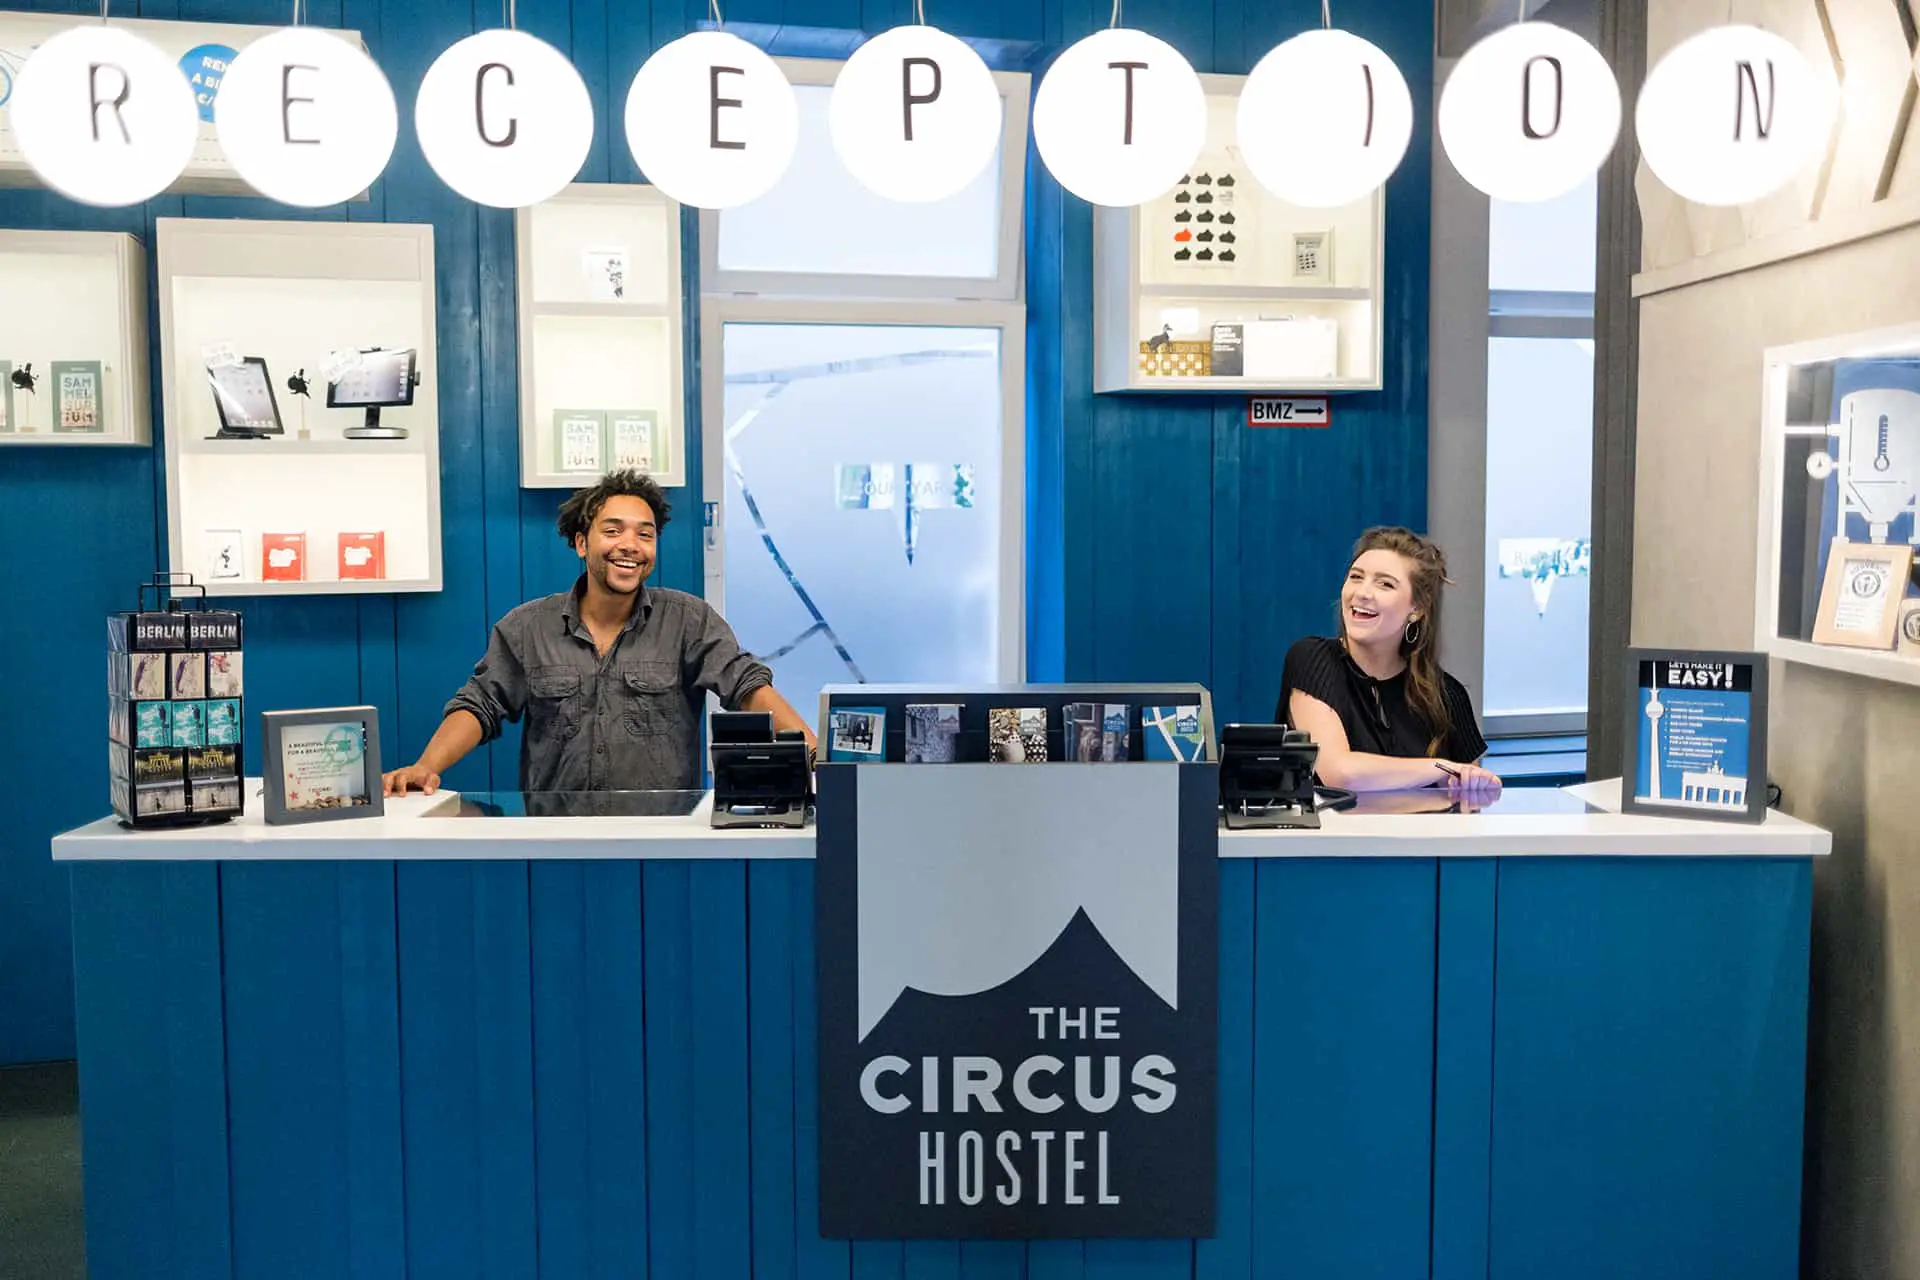 The Circus Hostel reception